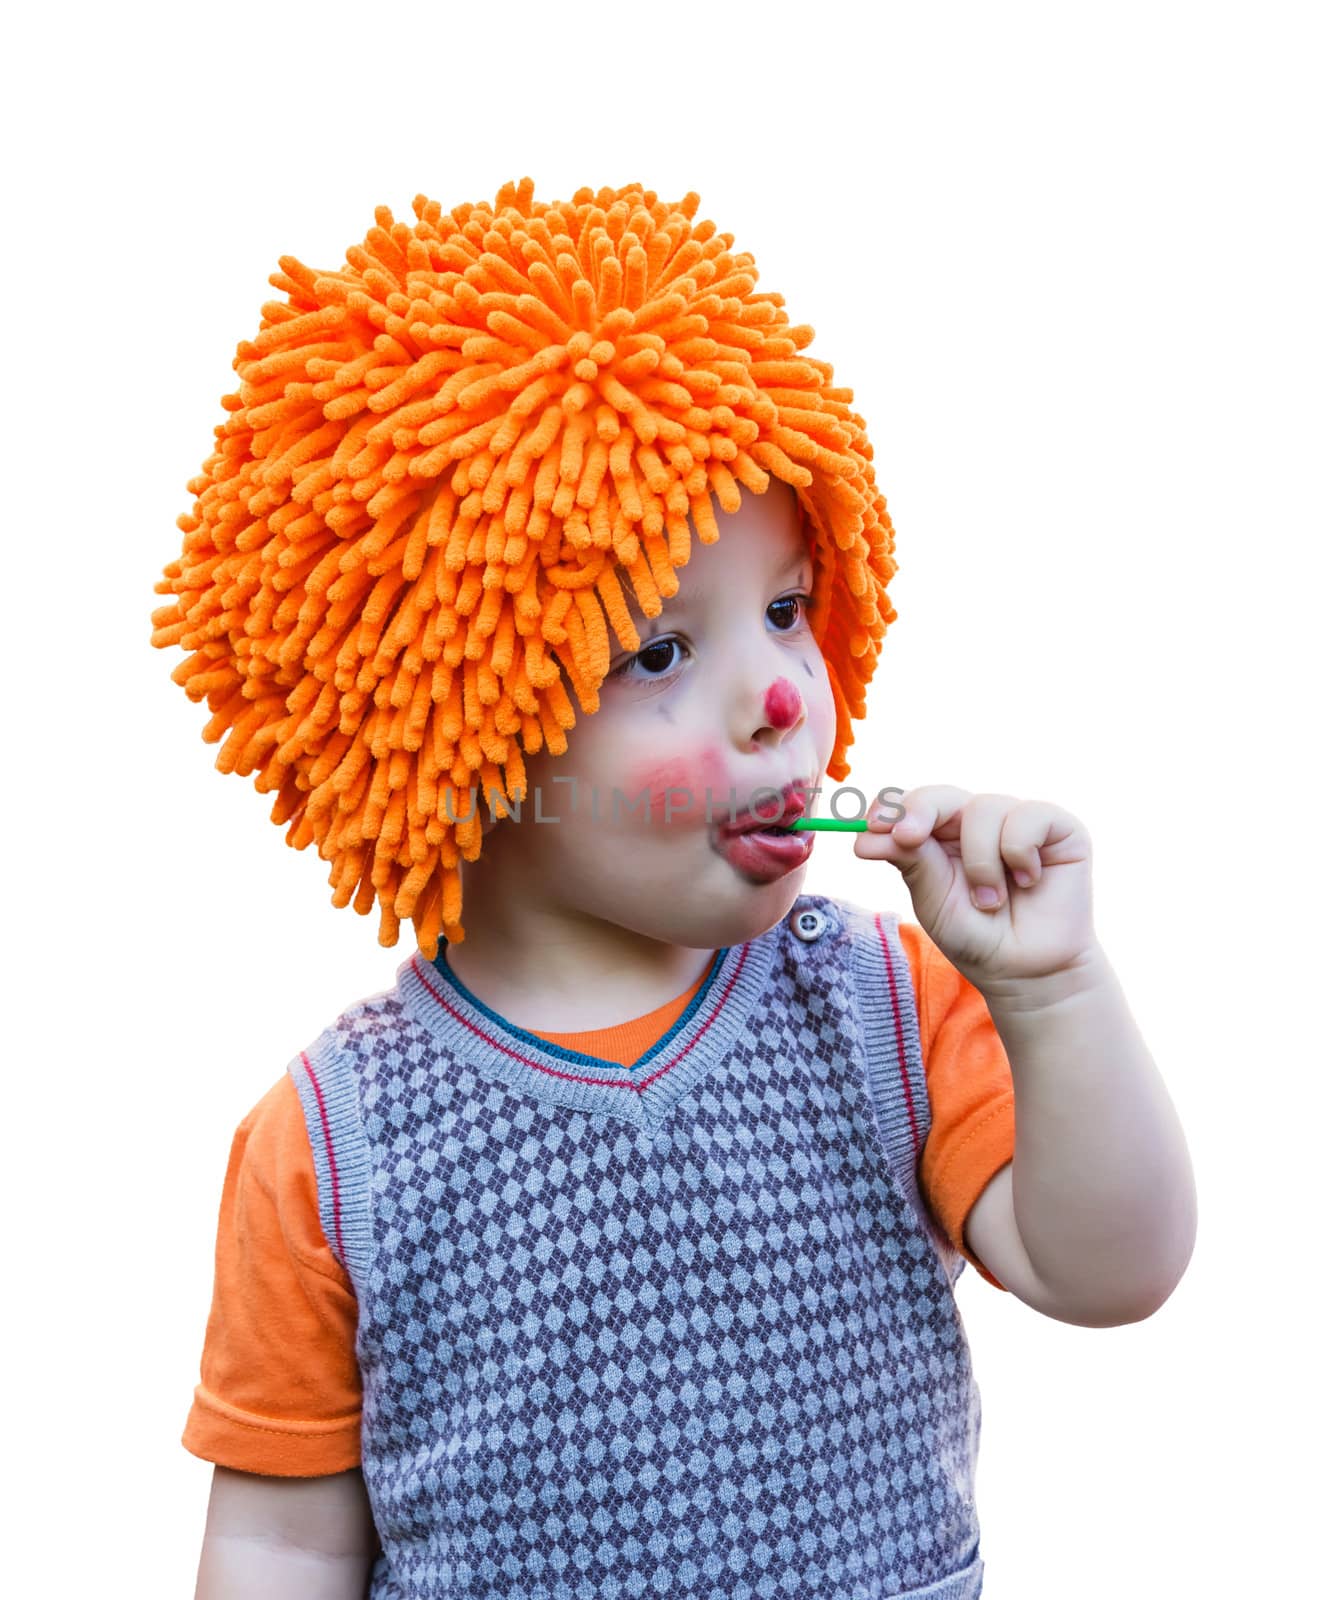 Portrait of cute clown child eating a lollipop isolated on white background